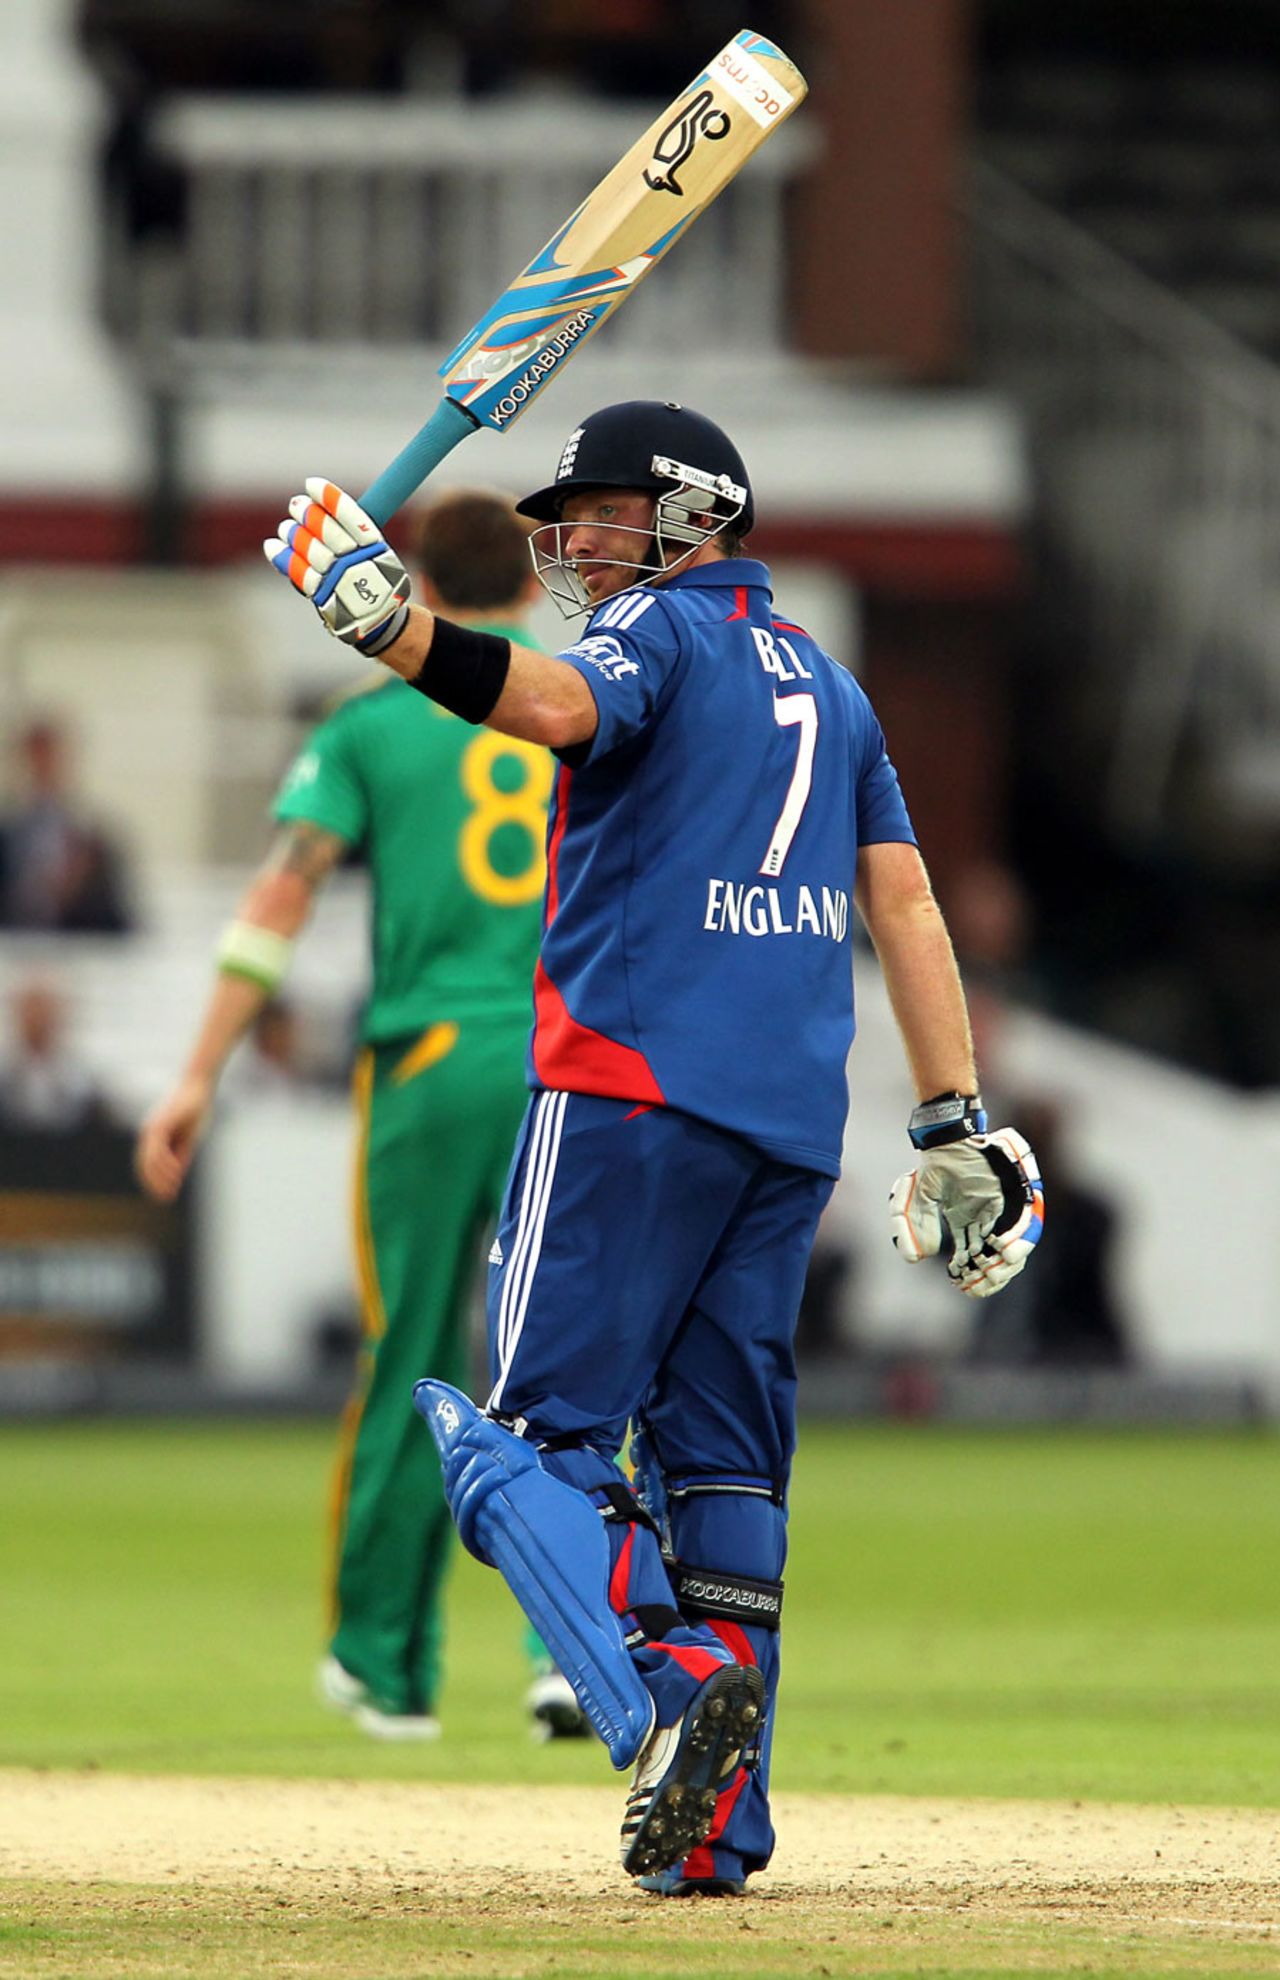 Ian Bell raises his bat after reaching fifty, England v South Africa, 4th ODI, Lord's, September 2, 2012